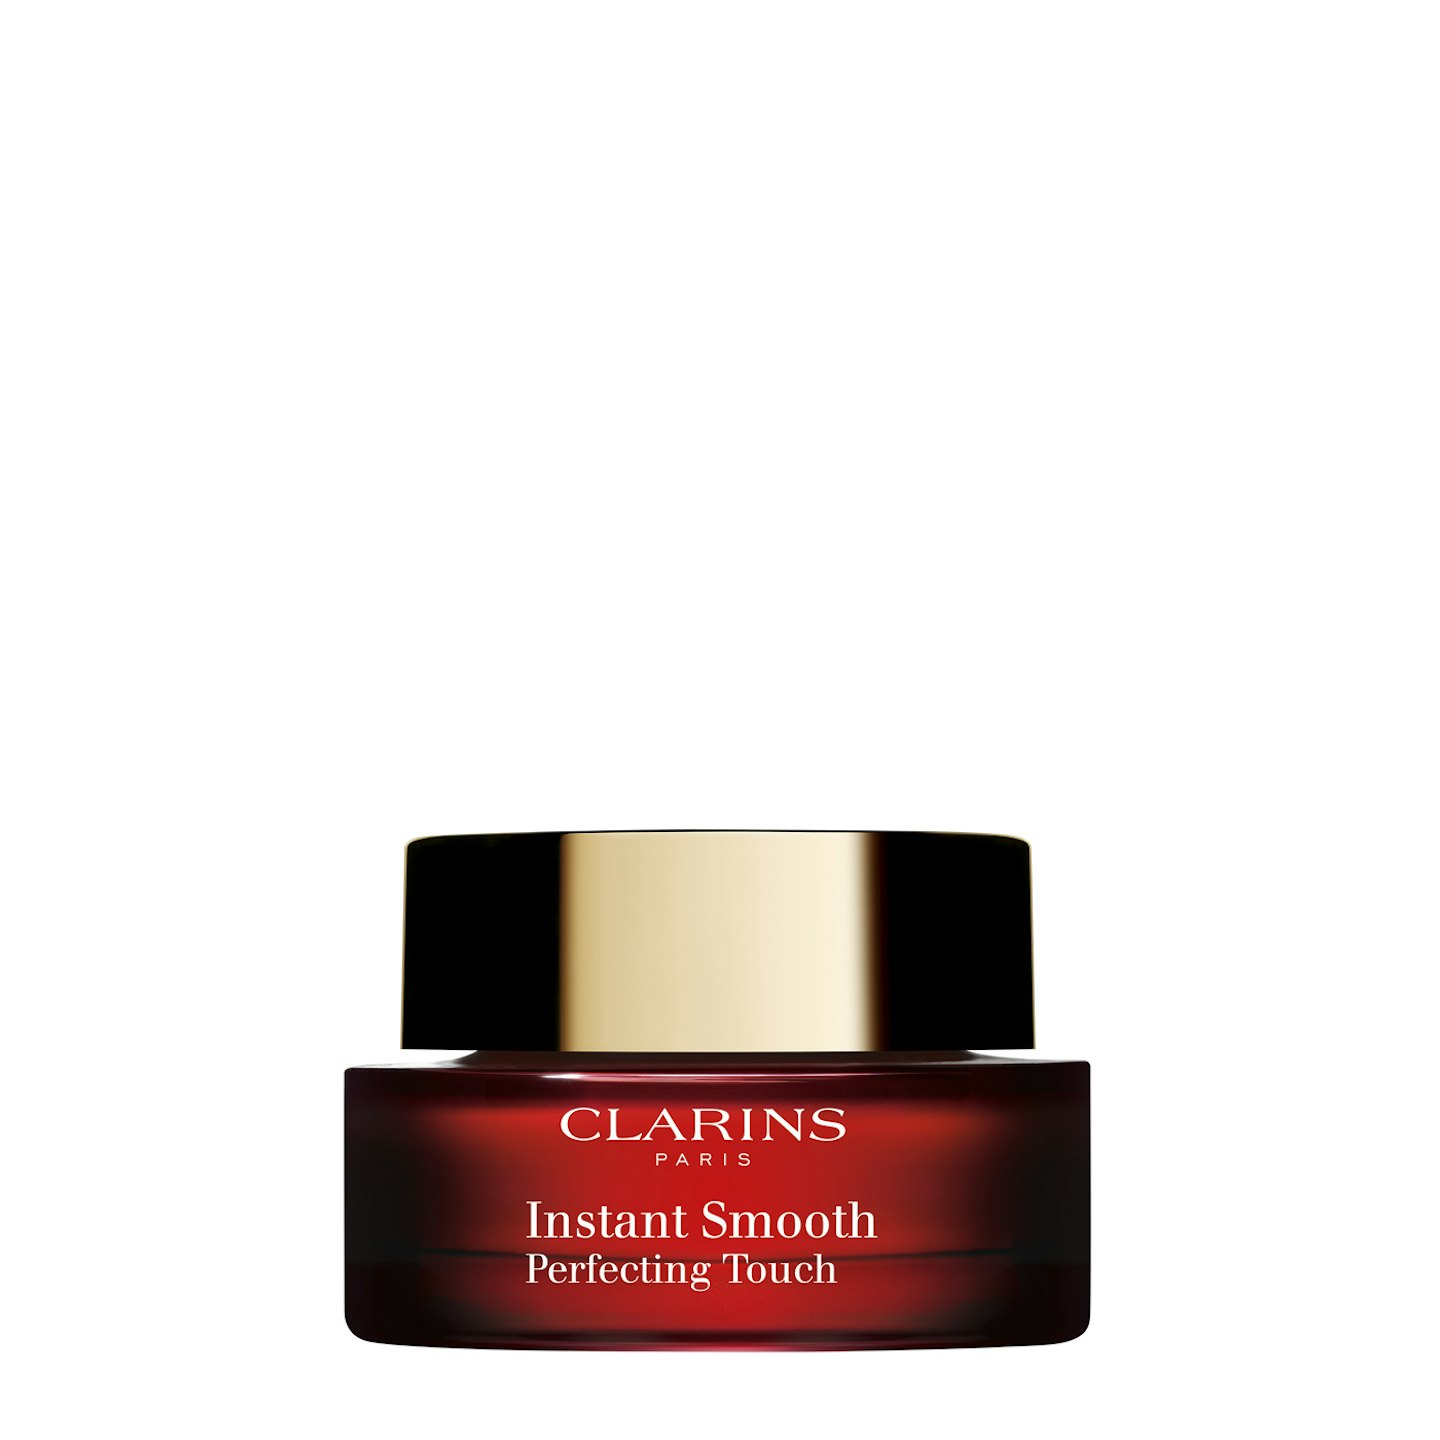 Clarins Instant Smooth Perfecting Touch, £26.50